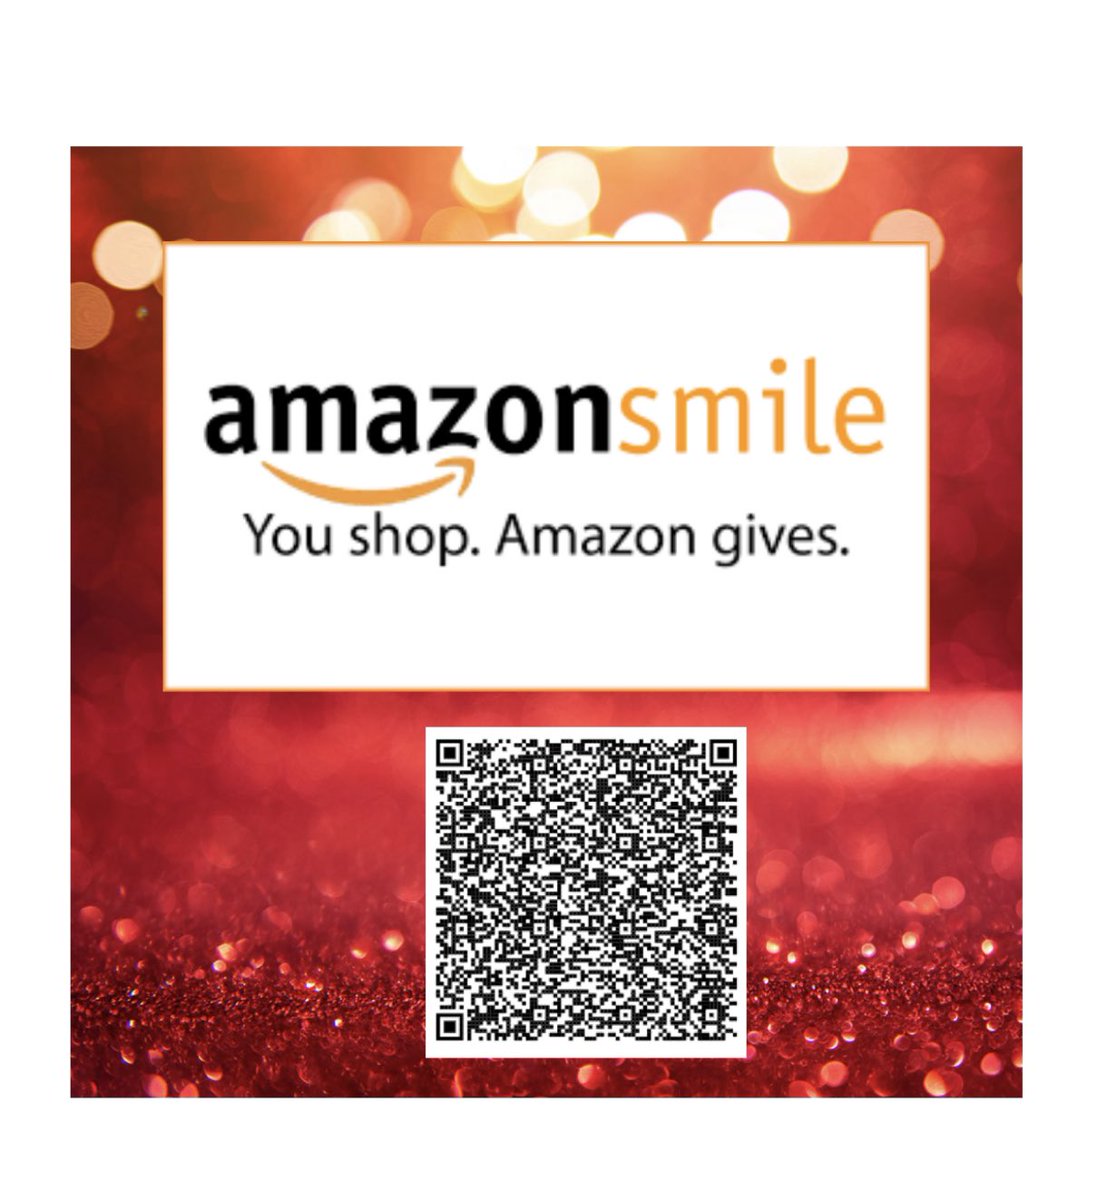 Sign up for Amazon Smile! When you shop at smile.amazon.com, Amazon donates 0.5% of your eligible purchases to us! At no cost to you. Click the link below and select Chris Yung Elementary School PTO as the organization to support. Thank you! smile.amazon.com